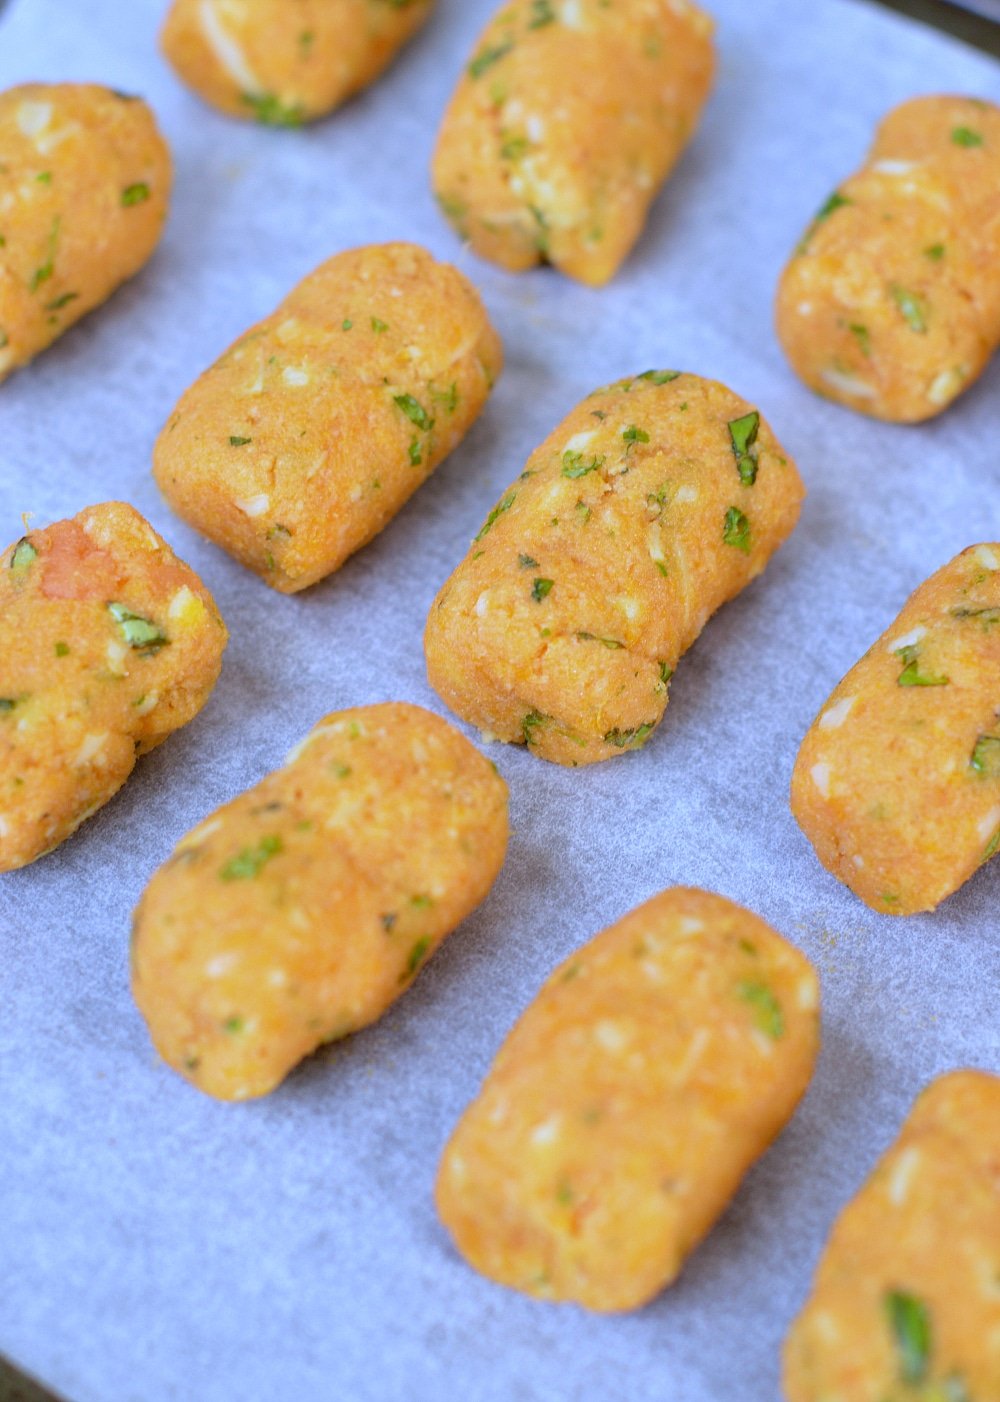 Baked sweet potato tots using mashed sweet potato. A great healthy snack for kids lunchbox or low calorie snack, appetizer with only 30 calorie per tot.